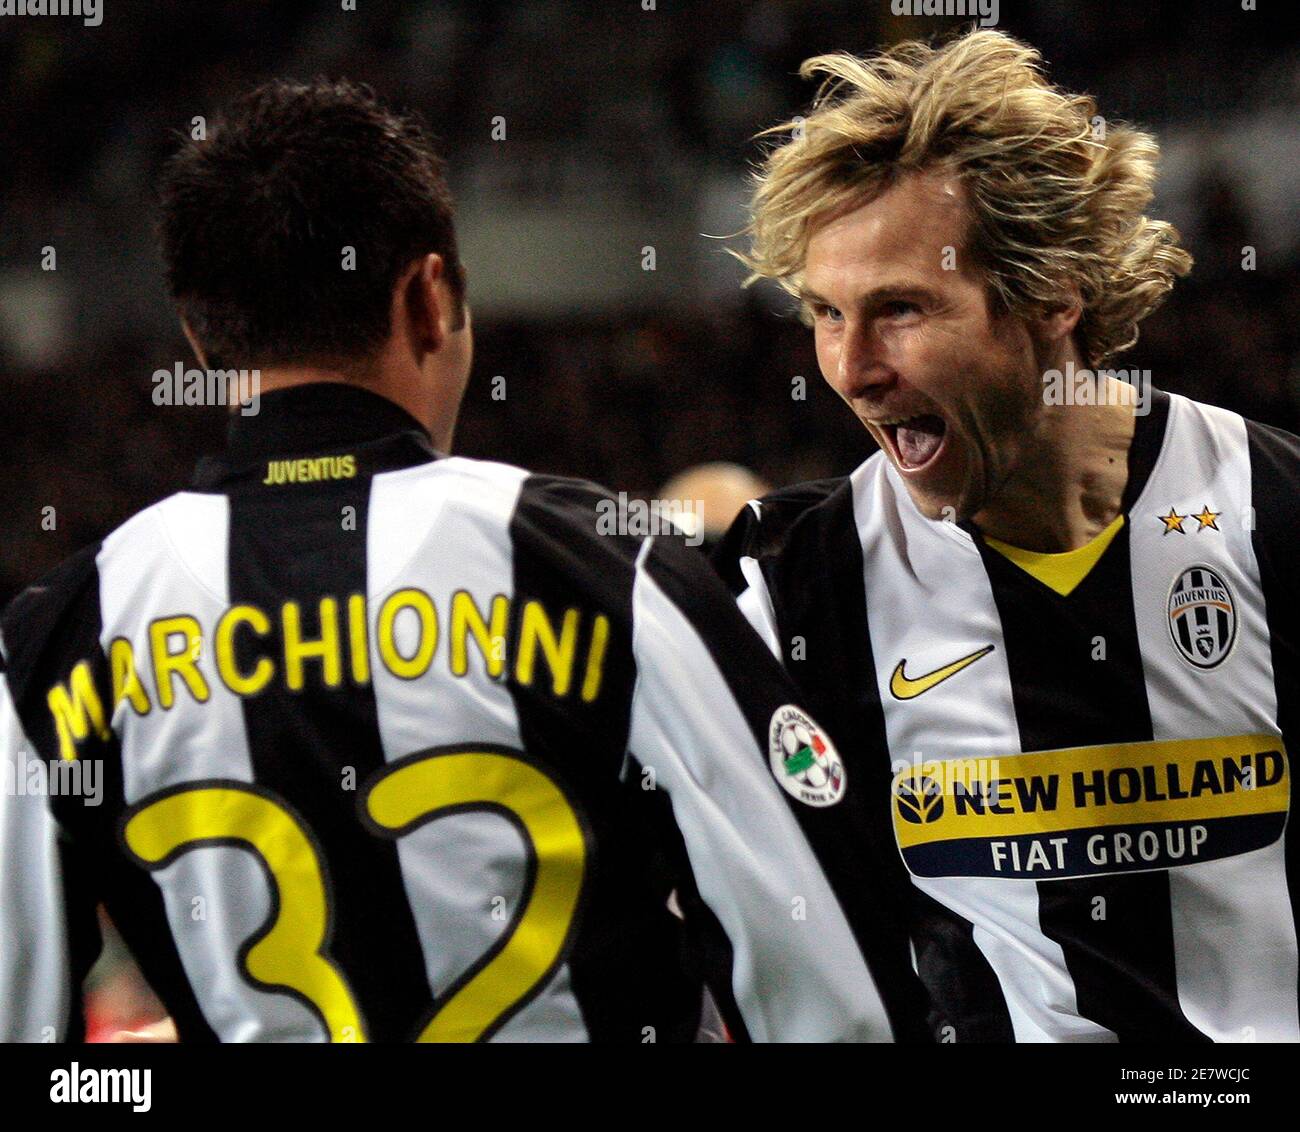 Juventus's Marco Marchionni (L) celebrates with his team mate Pavel Nedved after scoring a second goal against AS Roma during their Italian Serie A soccCer match at the Olympic stadium in Turin November 1, 2008. REUTERS/Alessandro Garofalo (ITALY) Stock Photo